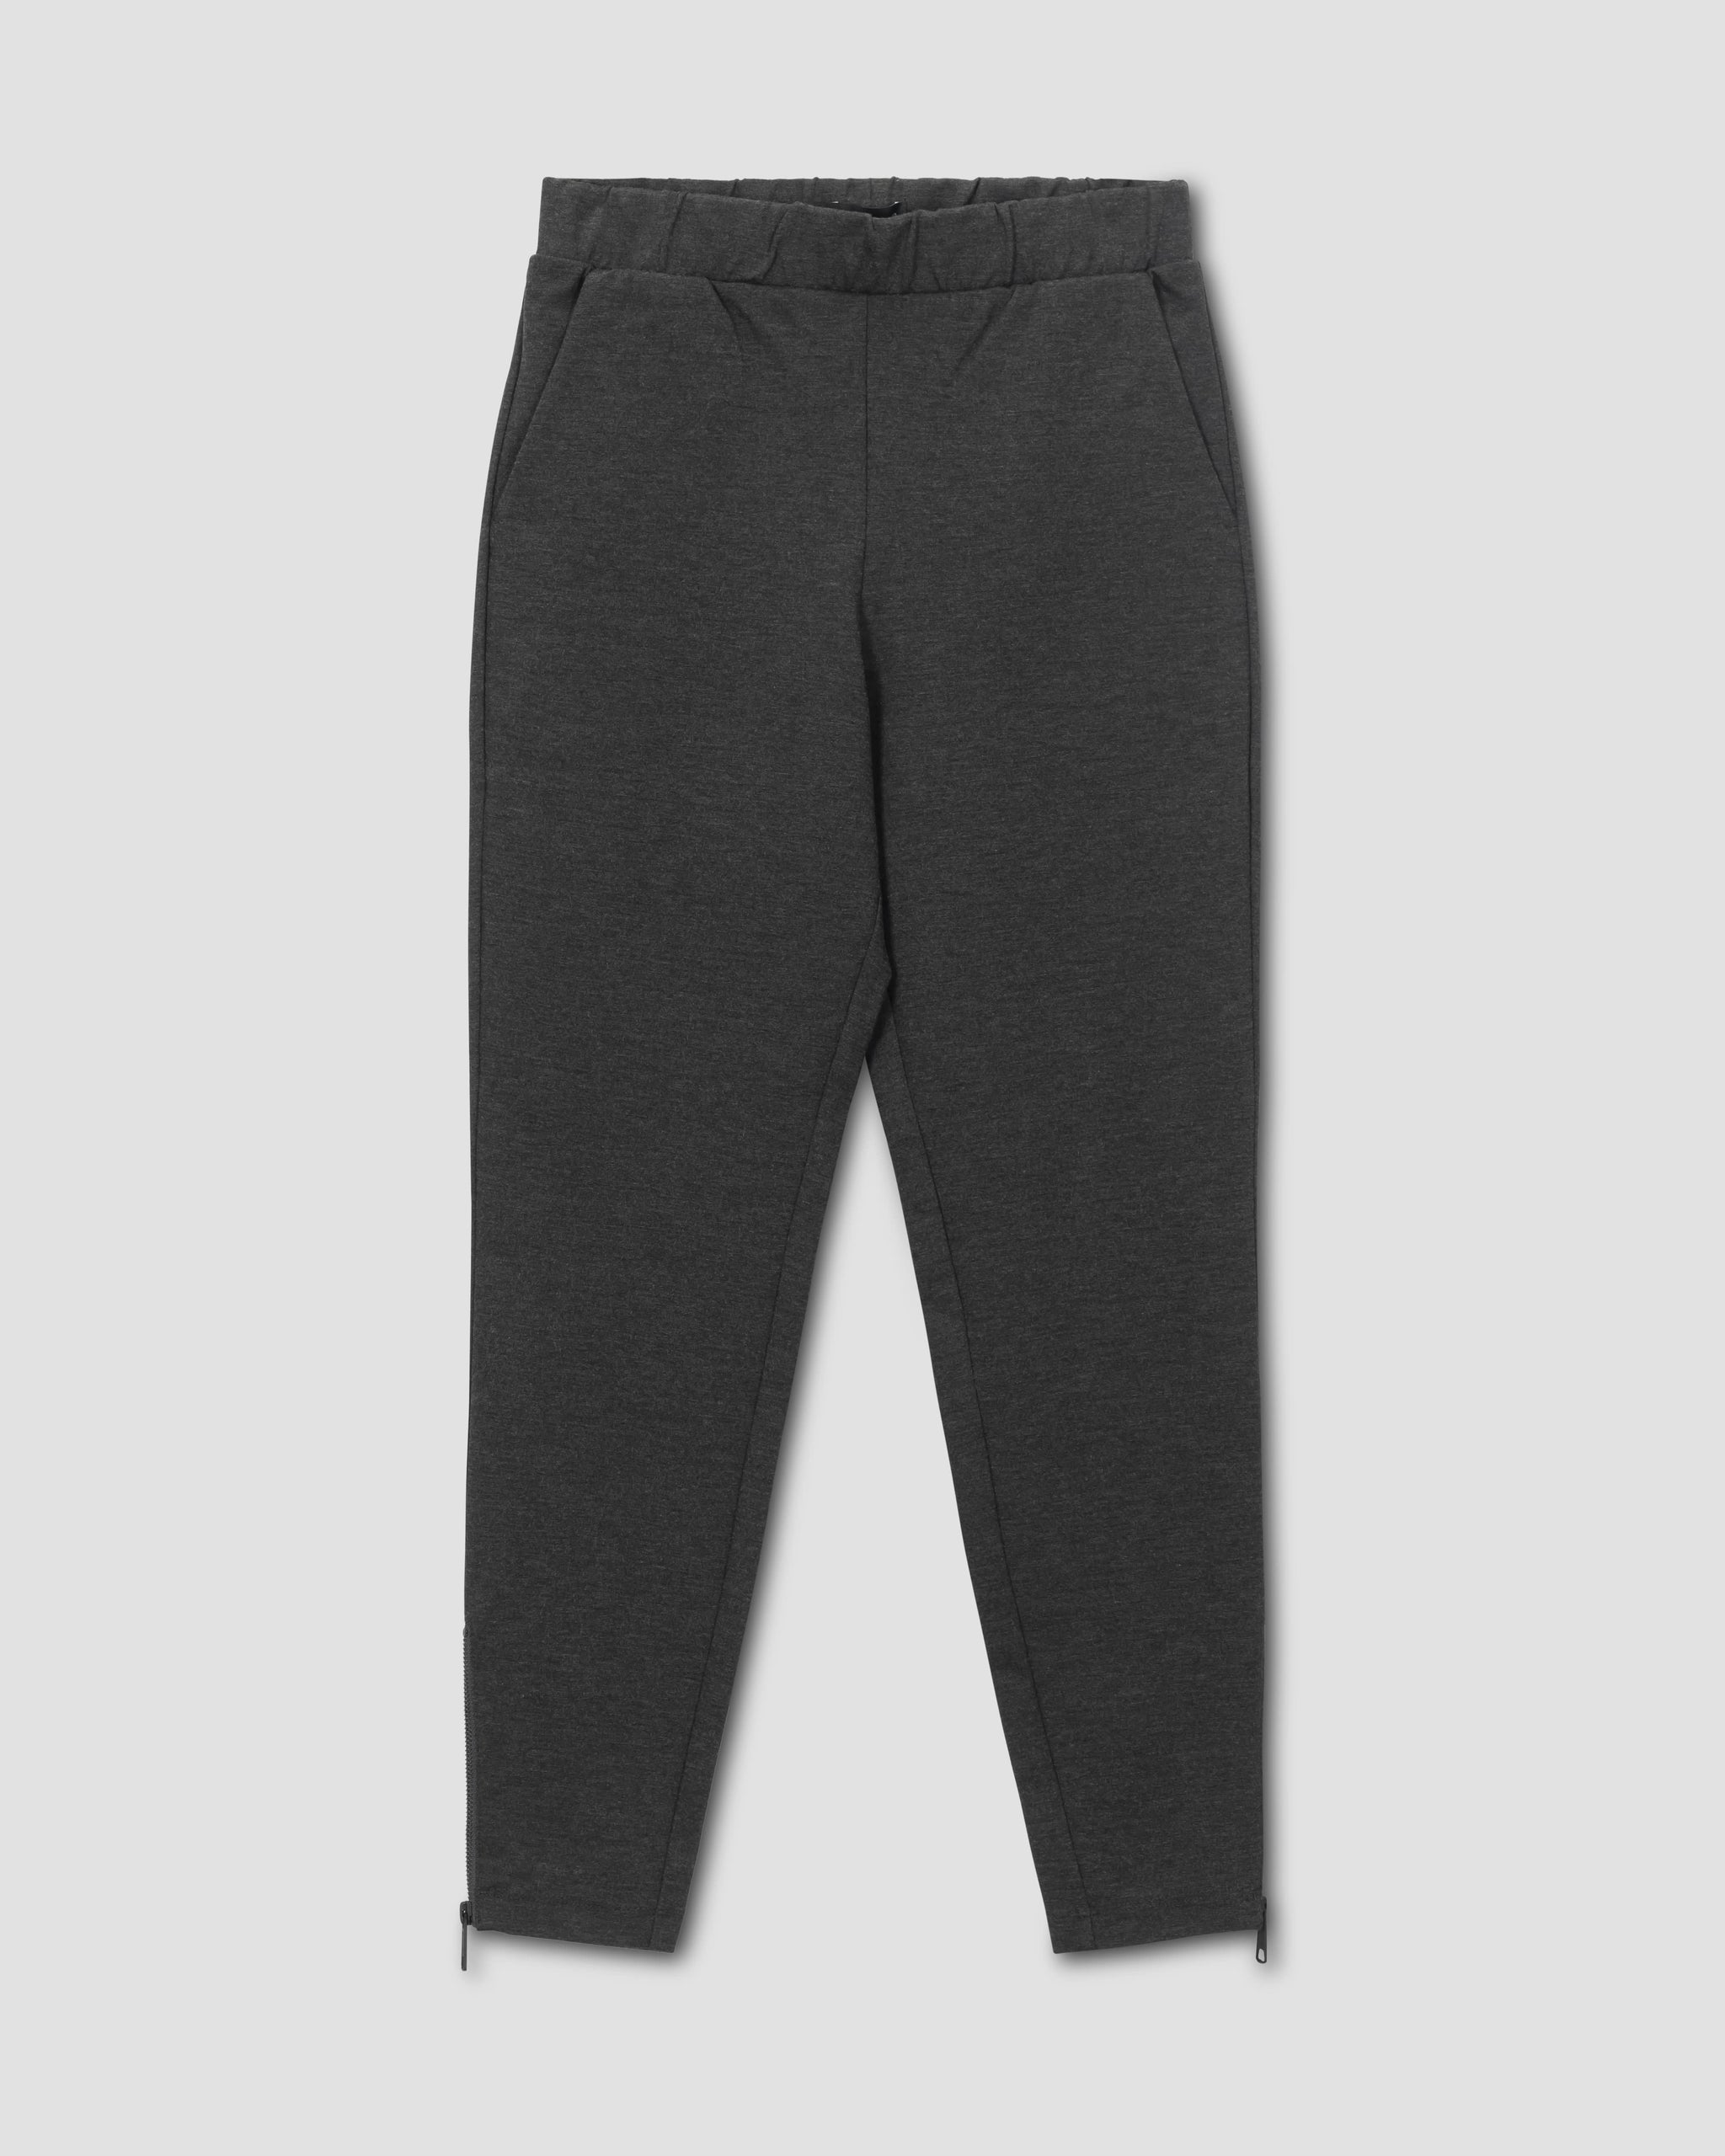 Buy Signature Ponte Pant - Black White & Co. for Sale Online United States